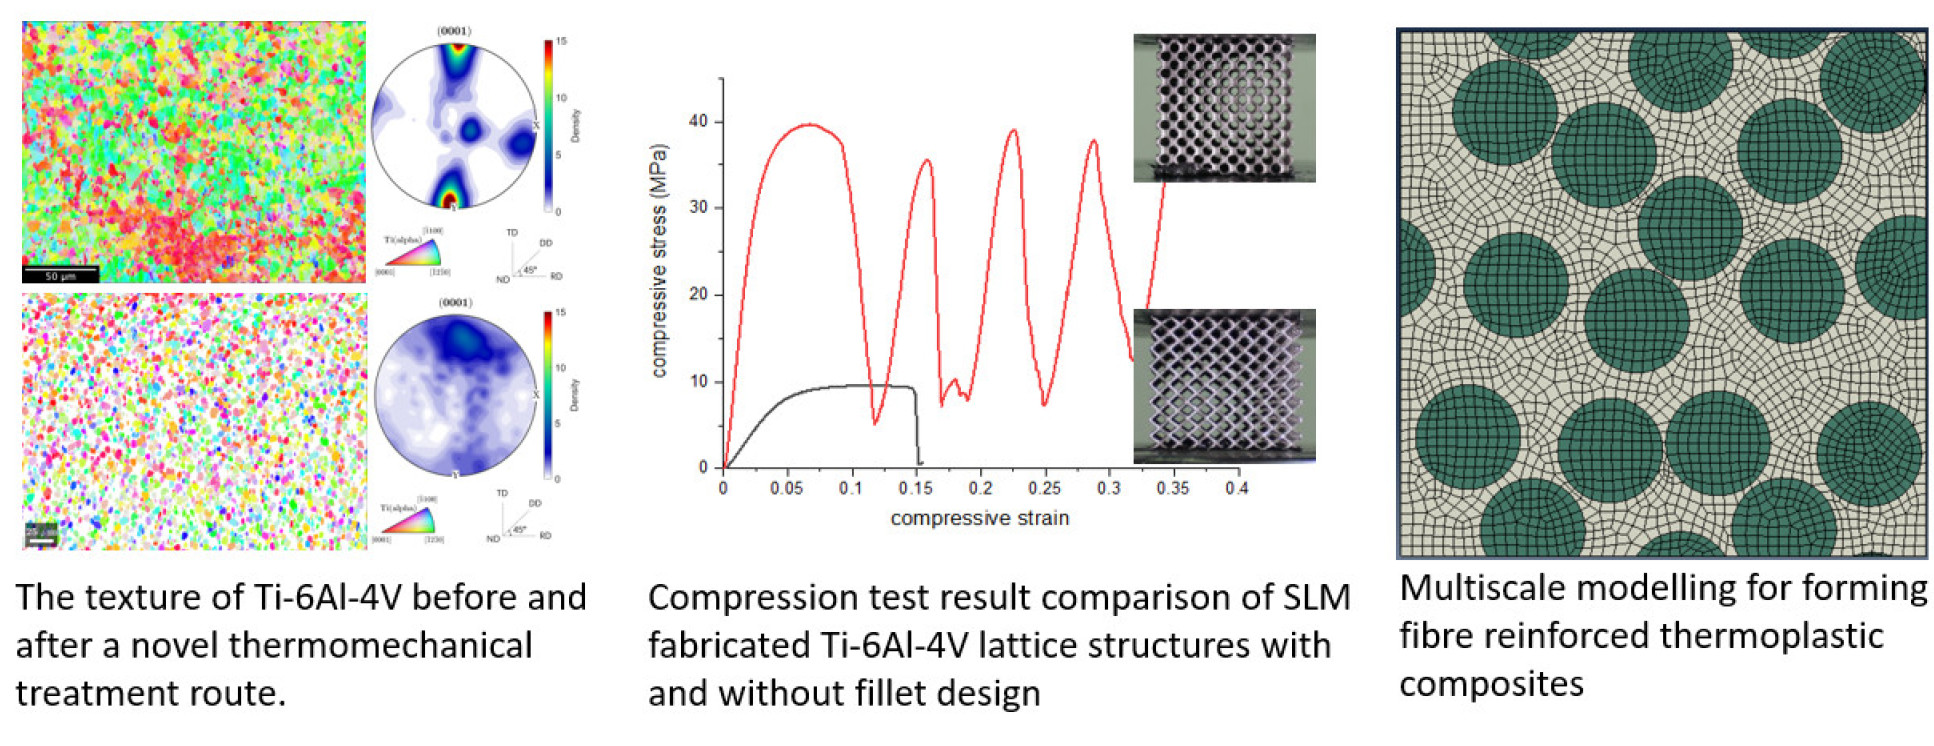 Three images that highlight our work on lightweight design manufacturing, left: Thermomechanical treatment of lattices, middle compression test of lattice structures, right multiscale modelling for forming fibre reinforced thermoplastic composites